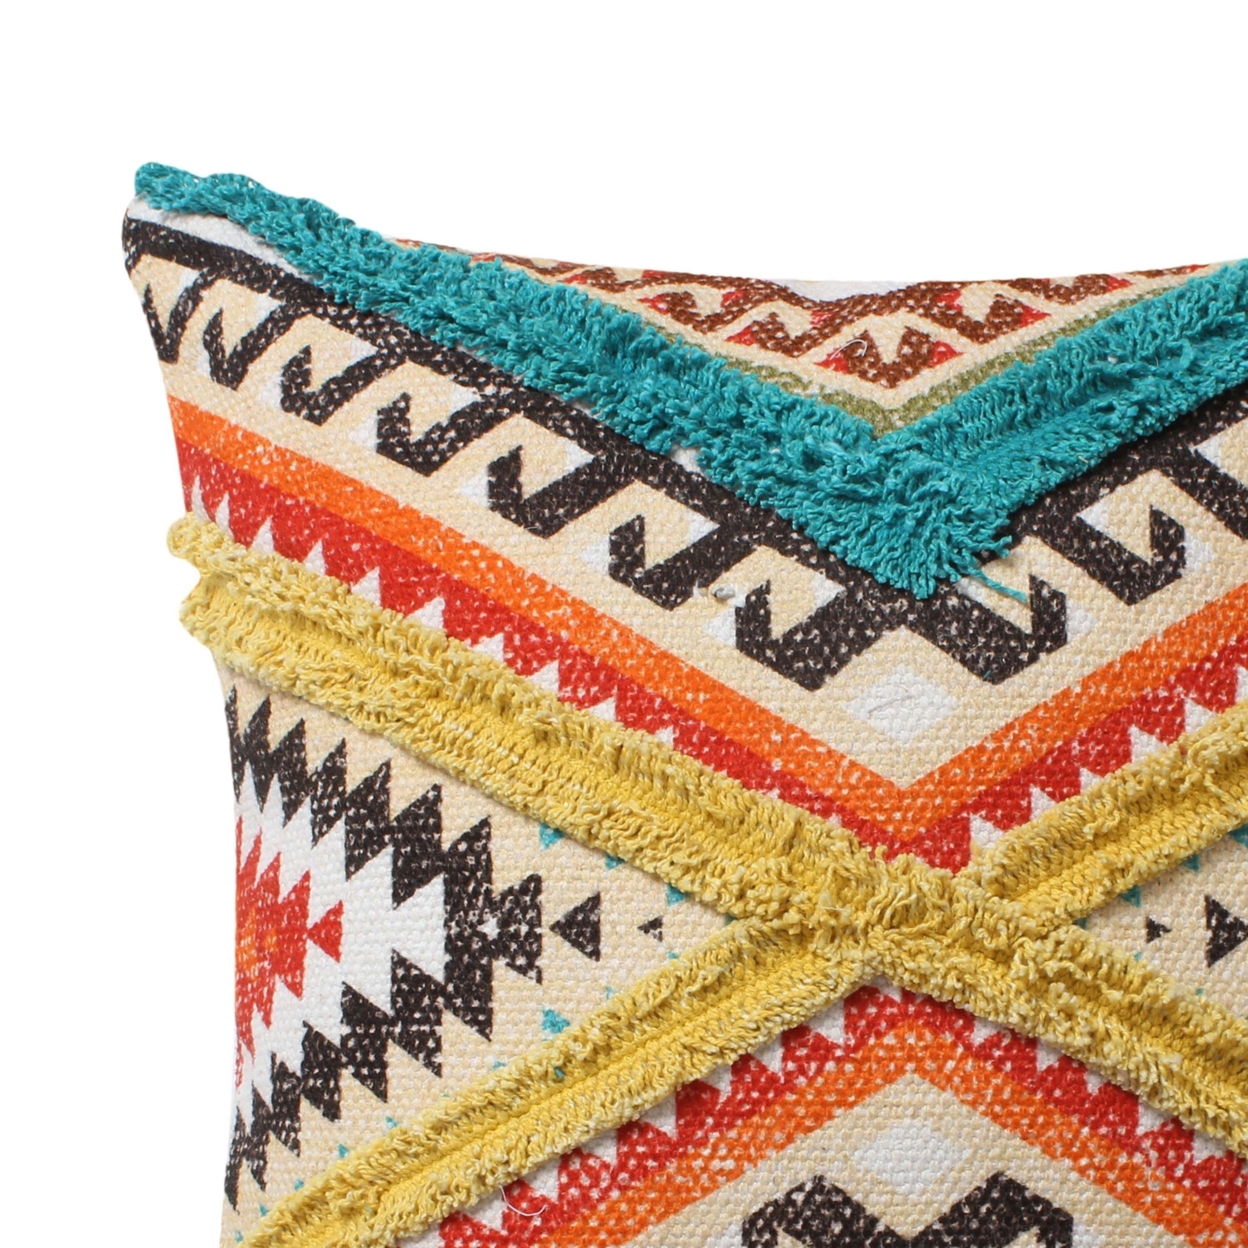 18 X 18 Square Cotton Accent Throw Pillow, Aztec Tribal Inspired Pattern, Trimmed Fringes, Set Of 2, Multicolor